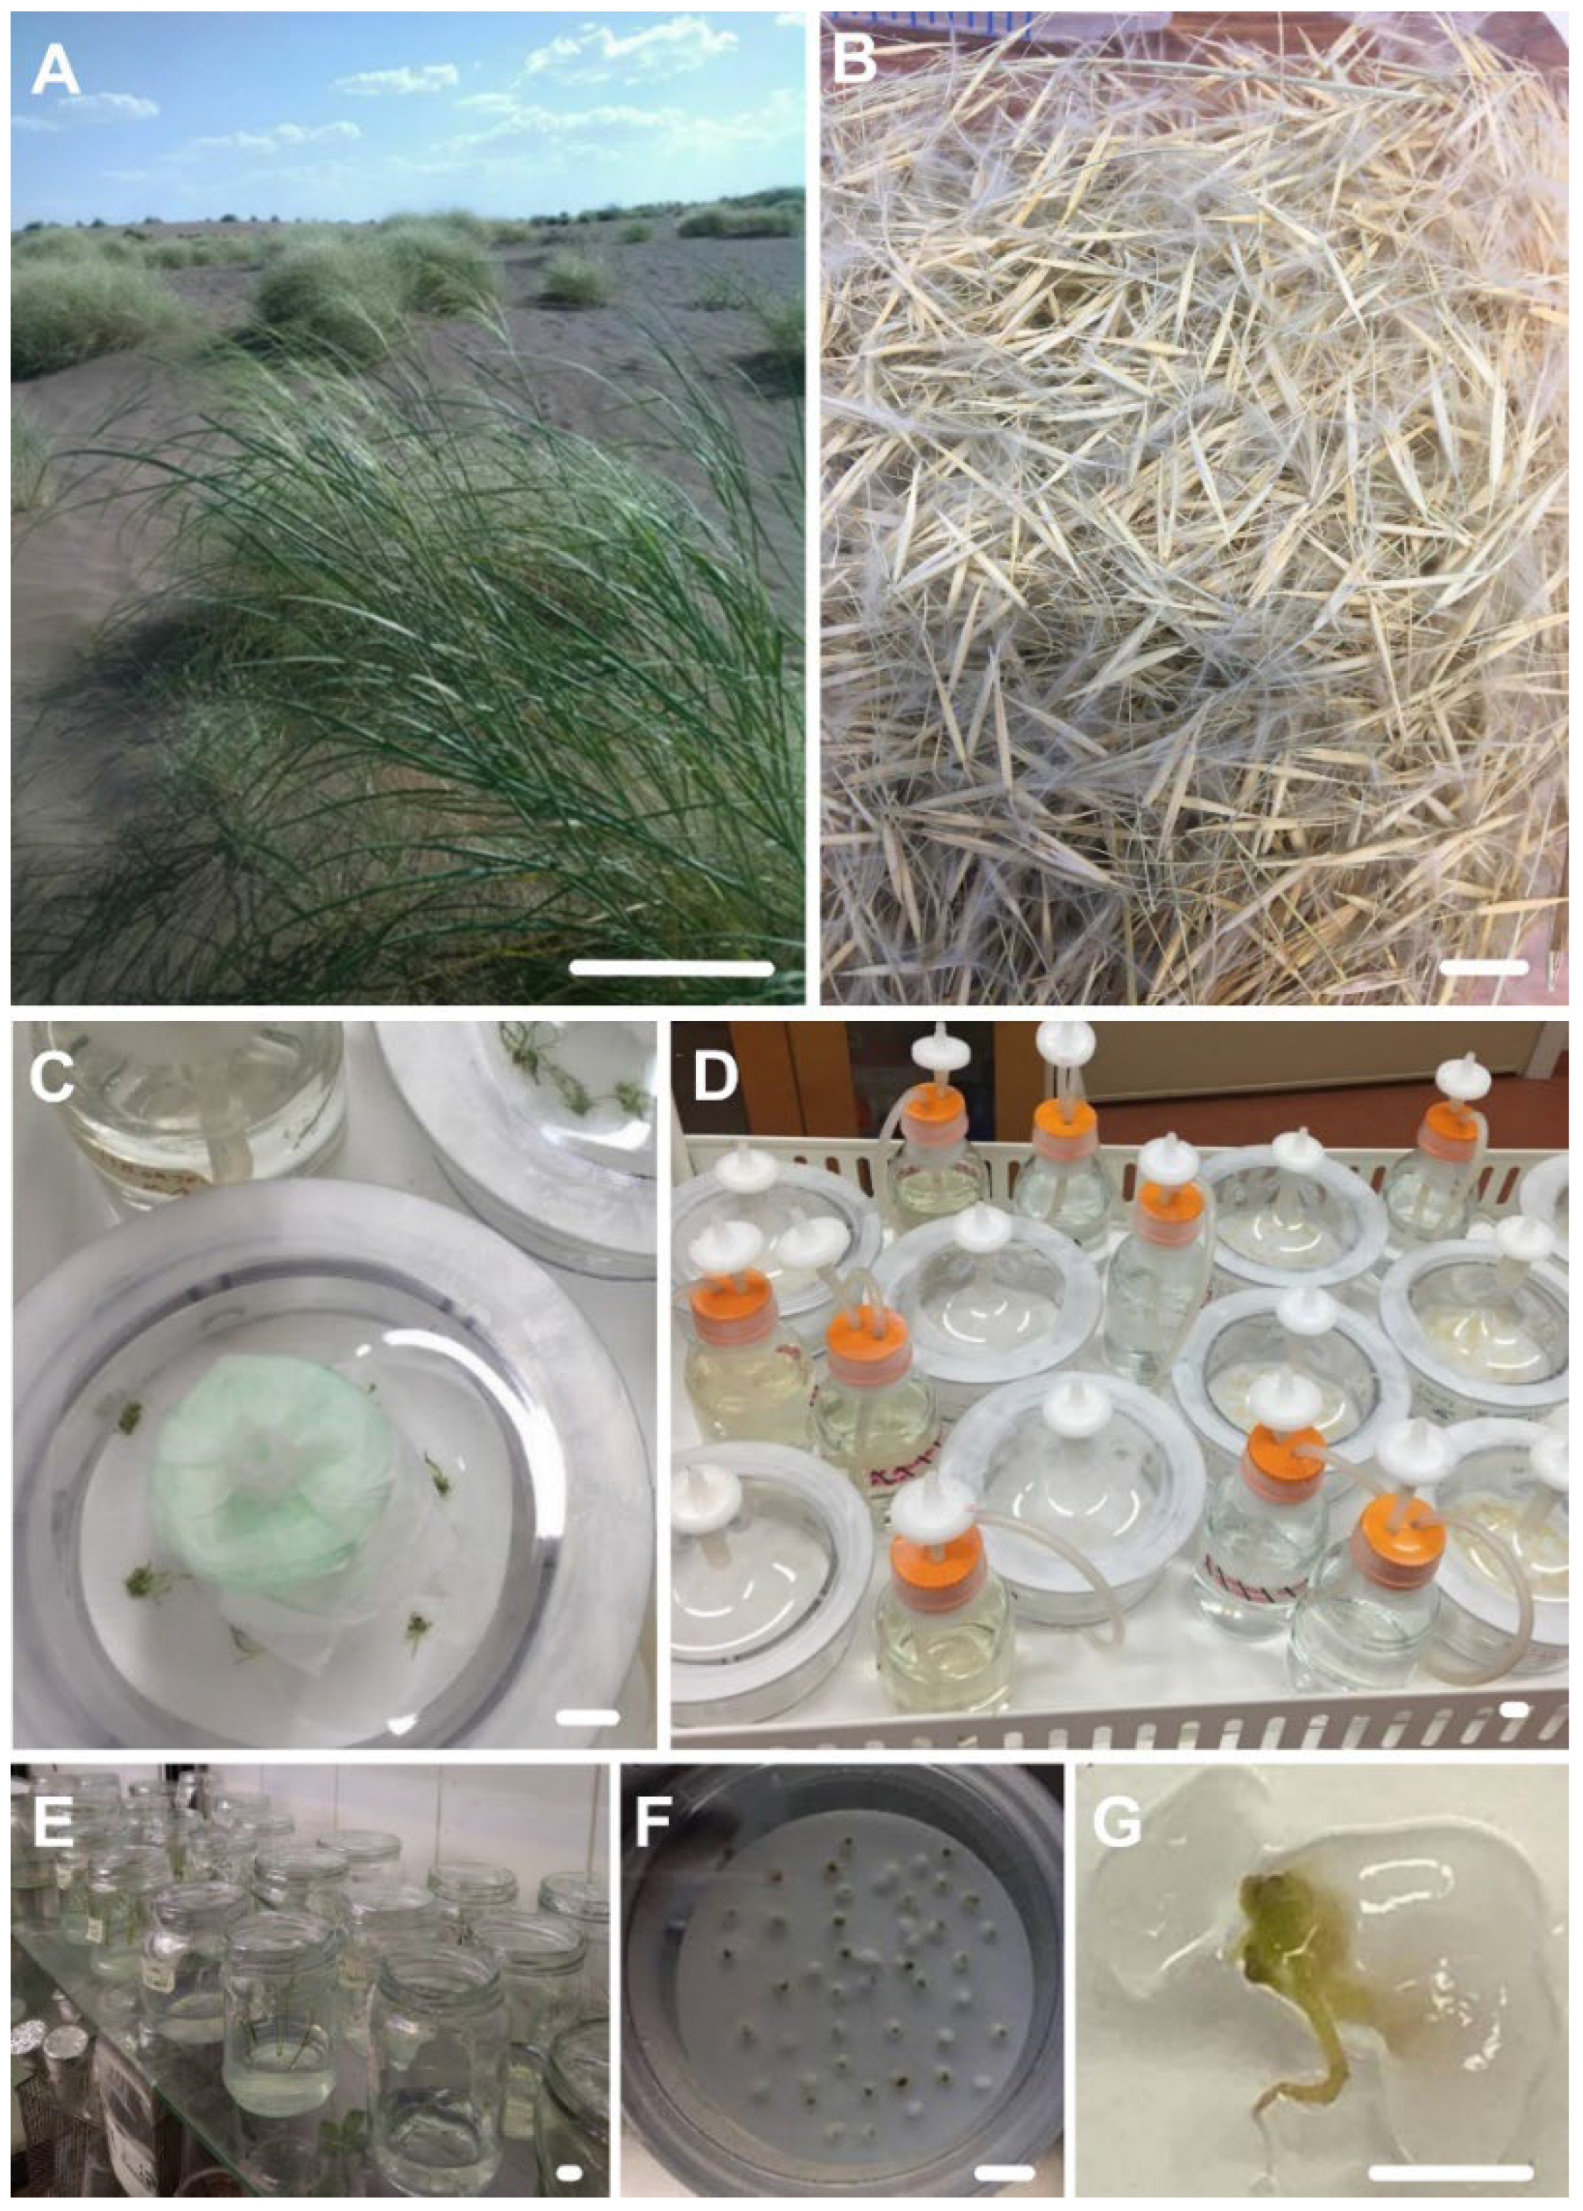 Plants Free Full-Text Stipagrostisandnbsp;pennata (Trin.) De Winter Artificial Seed Production and Seedlings Multiplication in Temporary Immersion Bioreactors pic pic